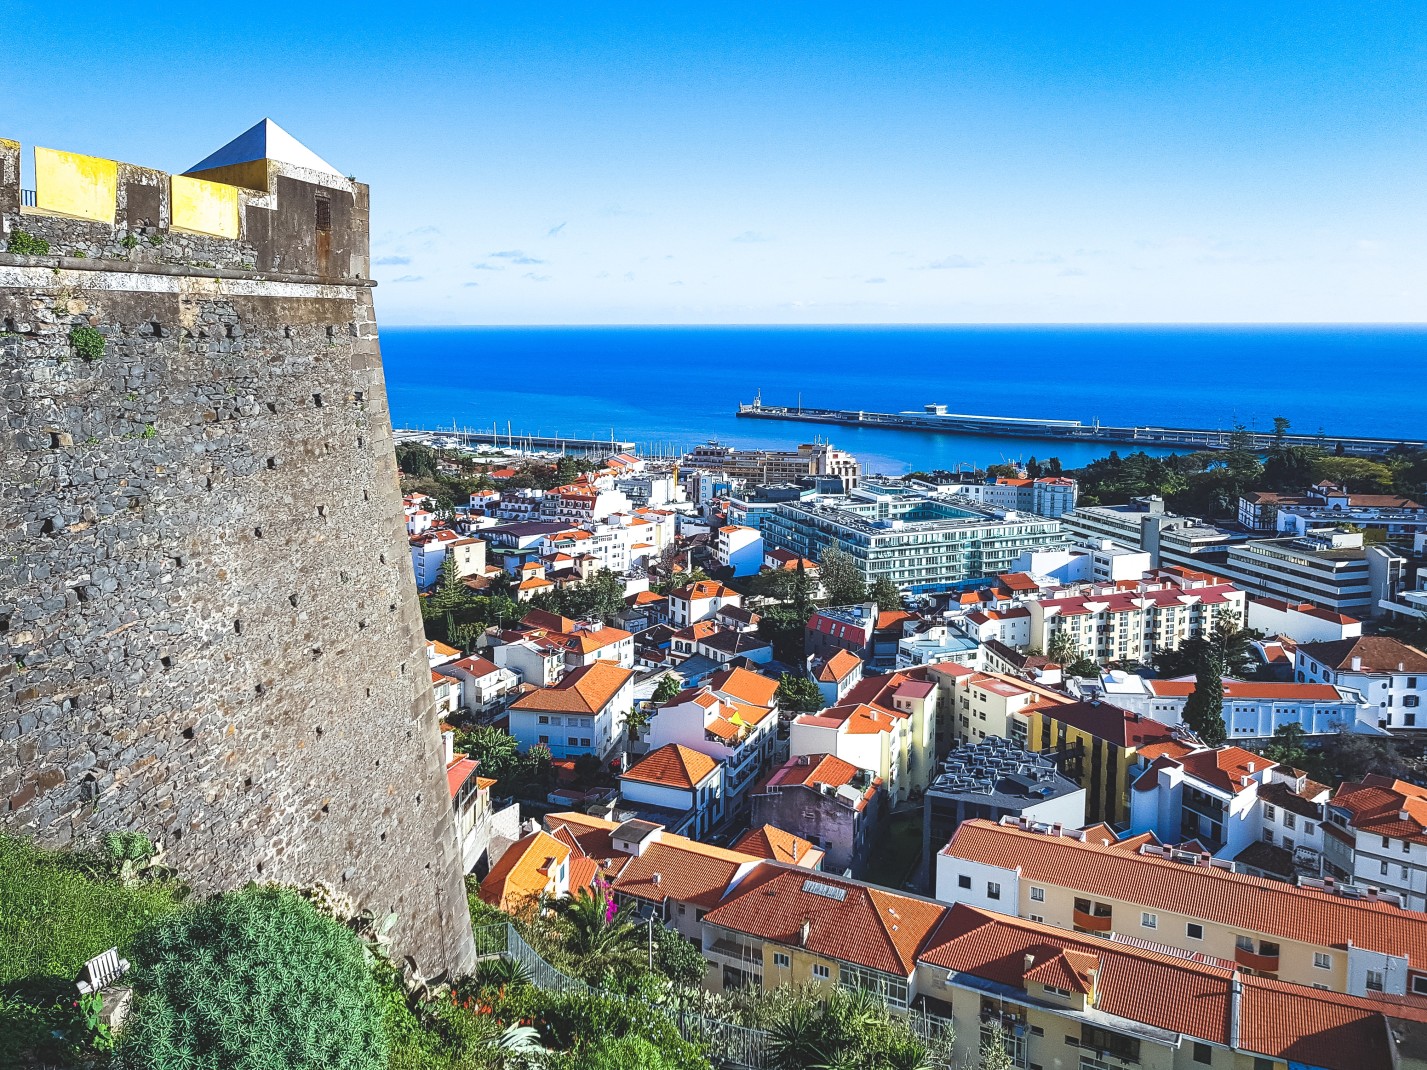 A grey stone castle-like structure overlooking a city of buildings with orange roofed buildings and a blue ocean in Funchal the capital of Madeira, Portugal. 